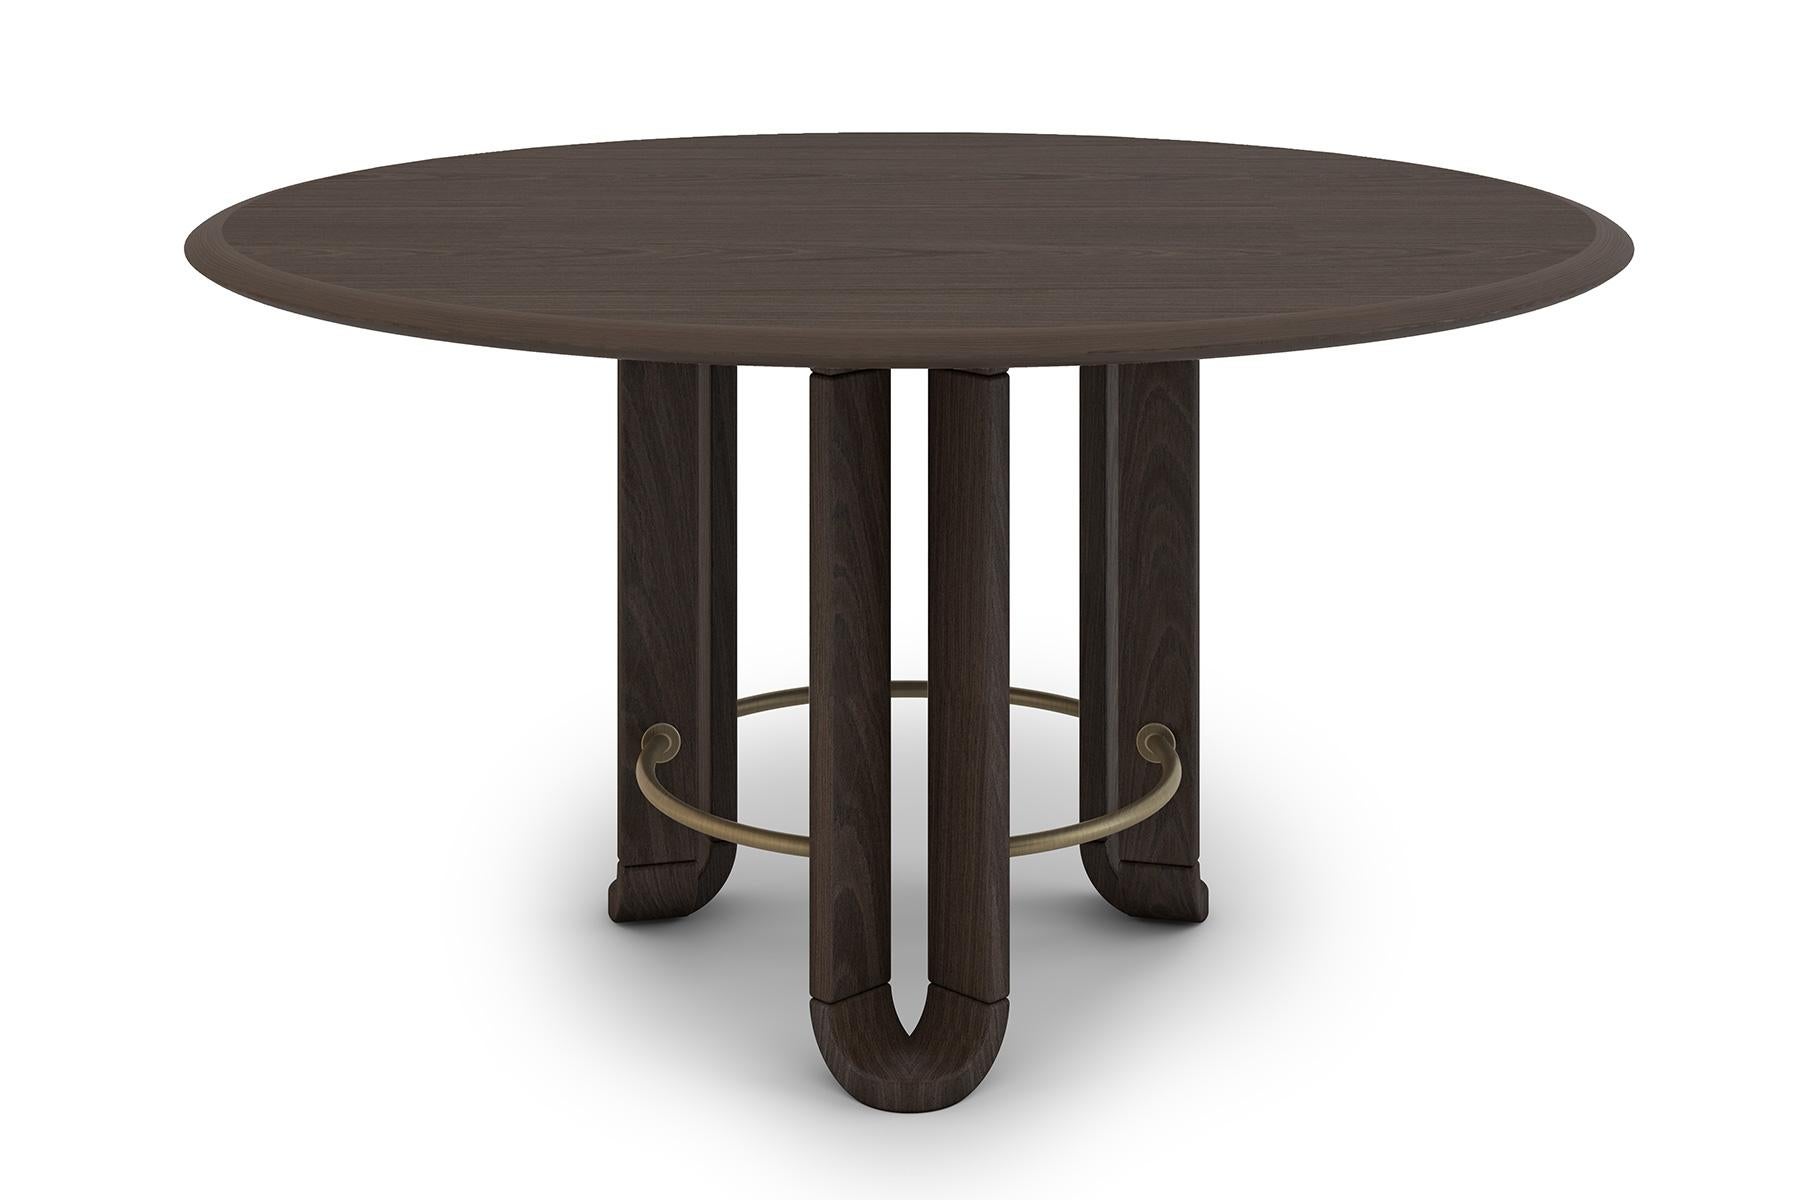 Unique round yaprak dining table by Feyzstudio
Dimensions: D 140 x 75 H
Materials: Walnut, maple, oak
Custom materials, sizing and finishes available as item is made to order.

FEYZ Studio is a New York based, multi-disciplinary design studio